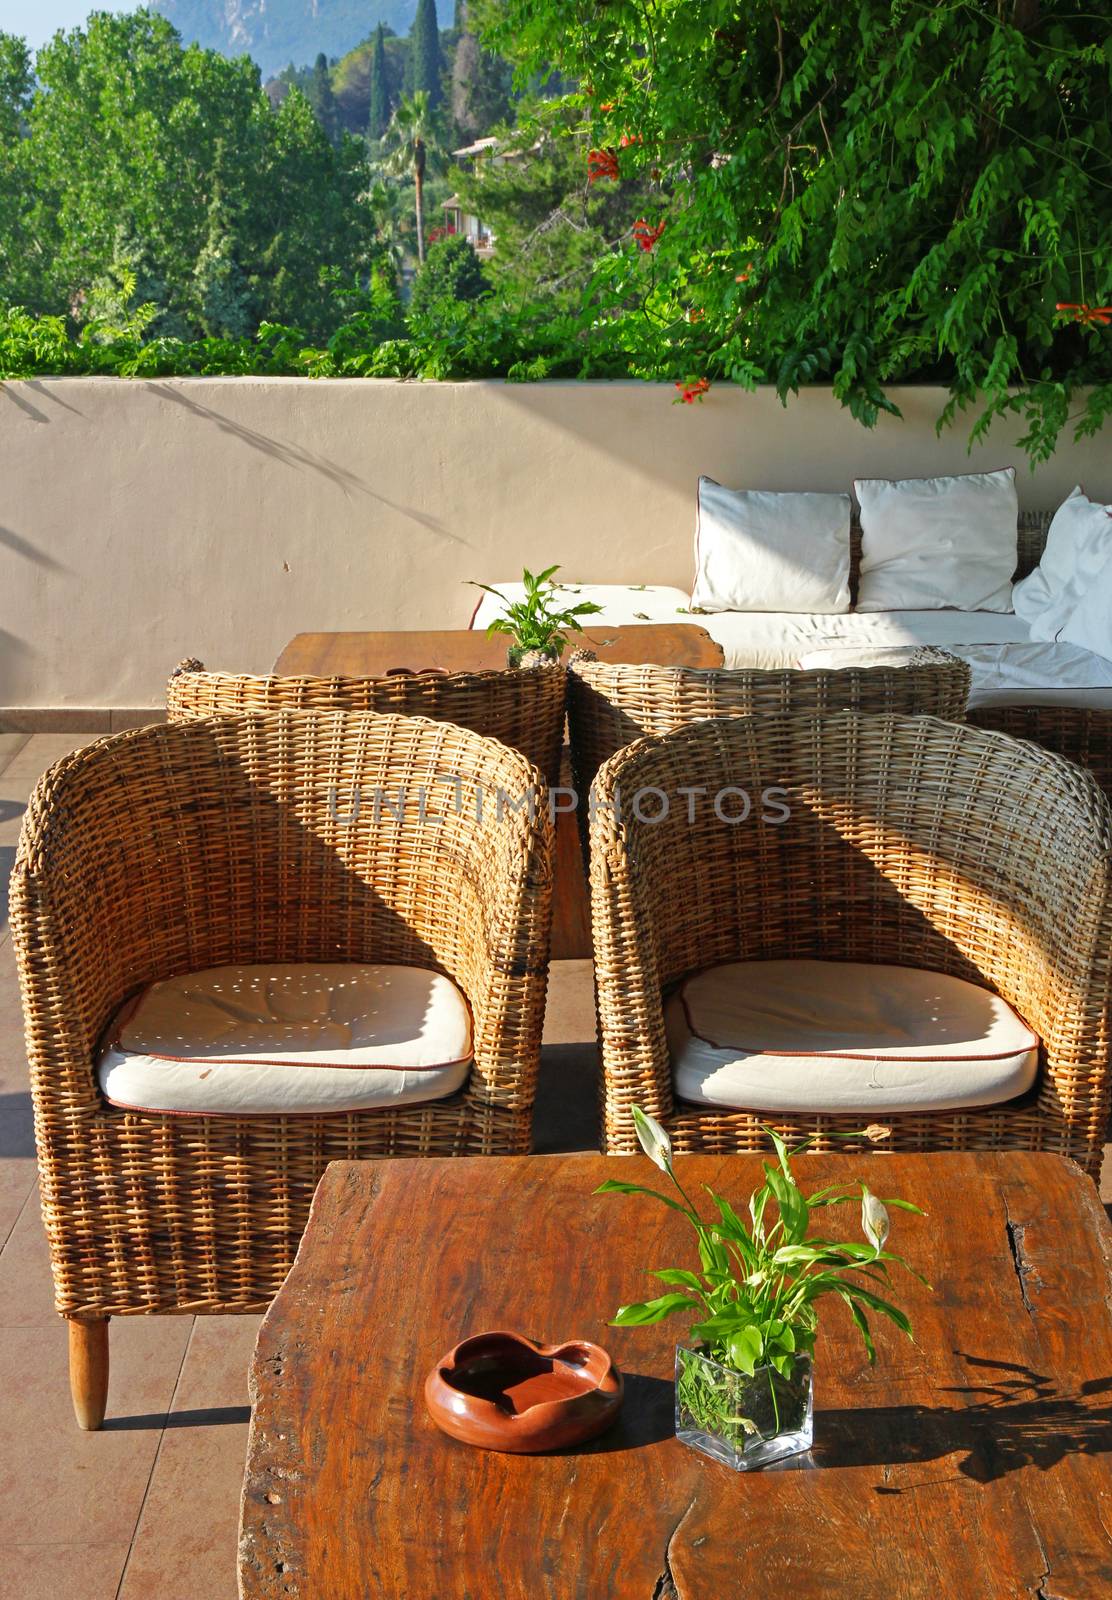 Greece. Corfu island. An open-air cafe with table and chairs  